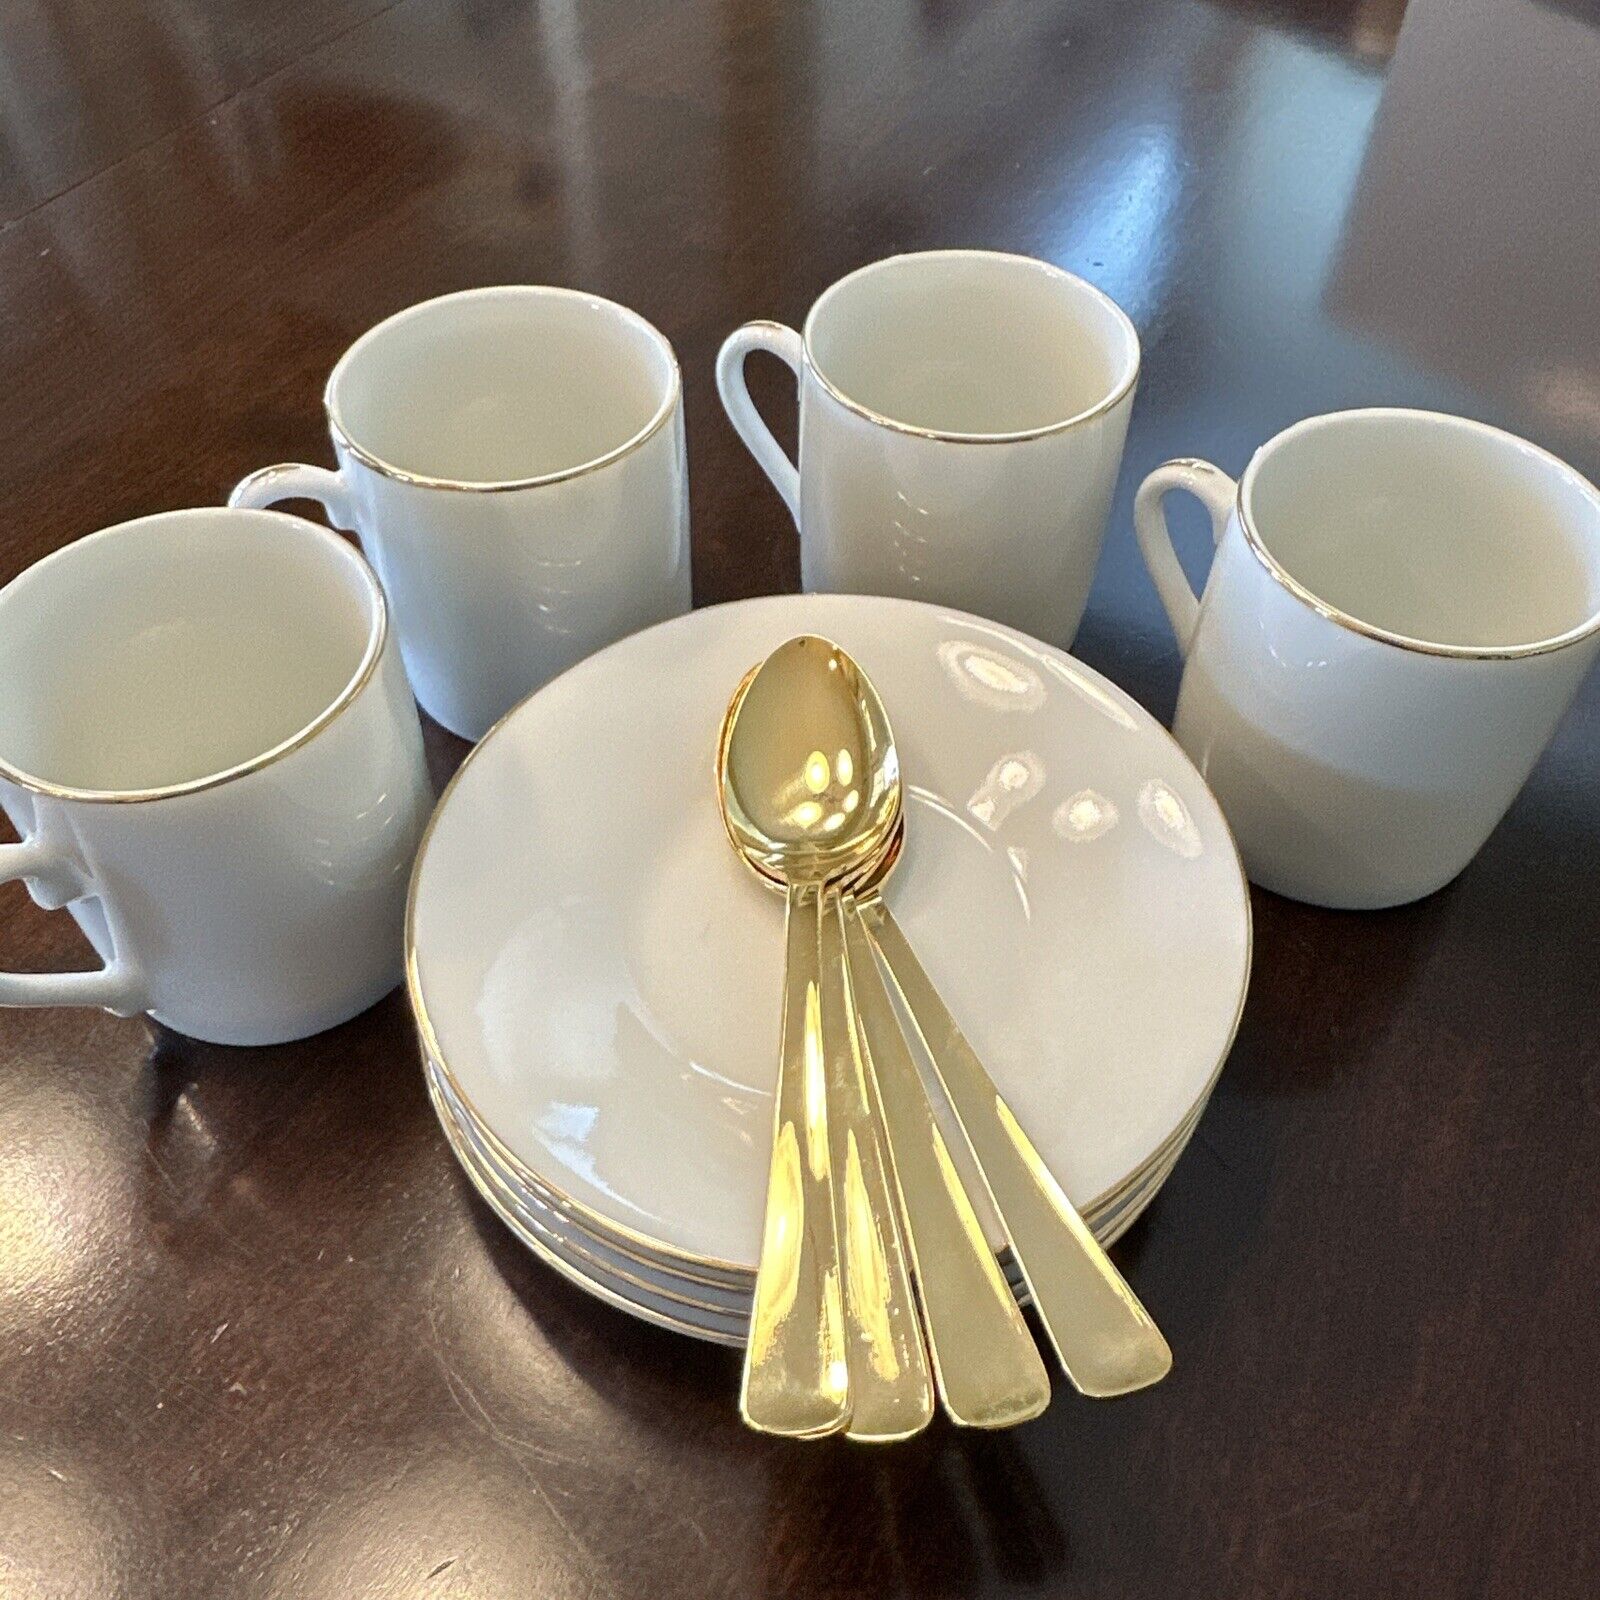 Vintage Demitasse Cup & Saucer Set Of 4 - White with Gold Rim NEW